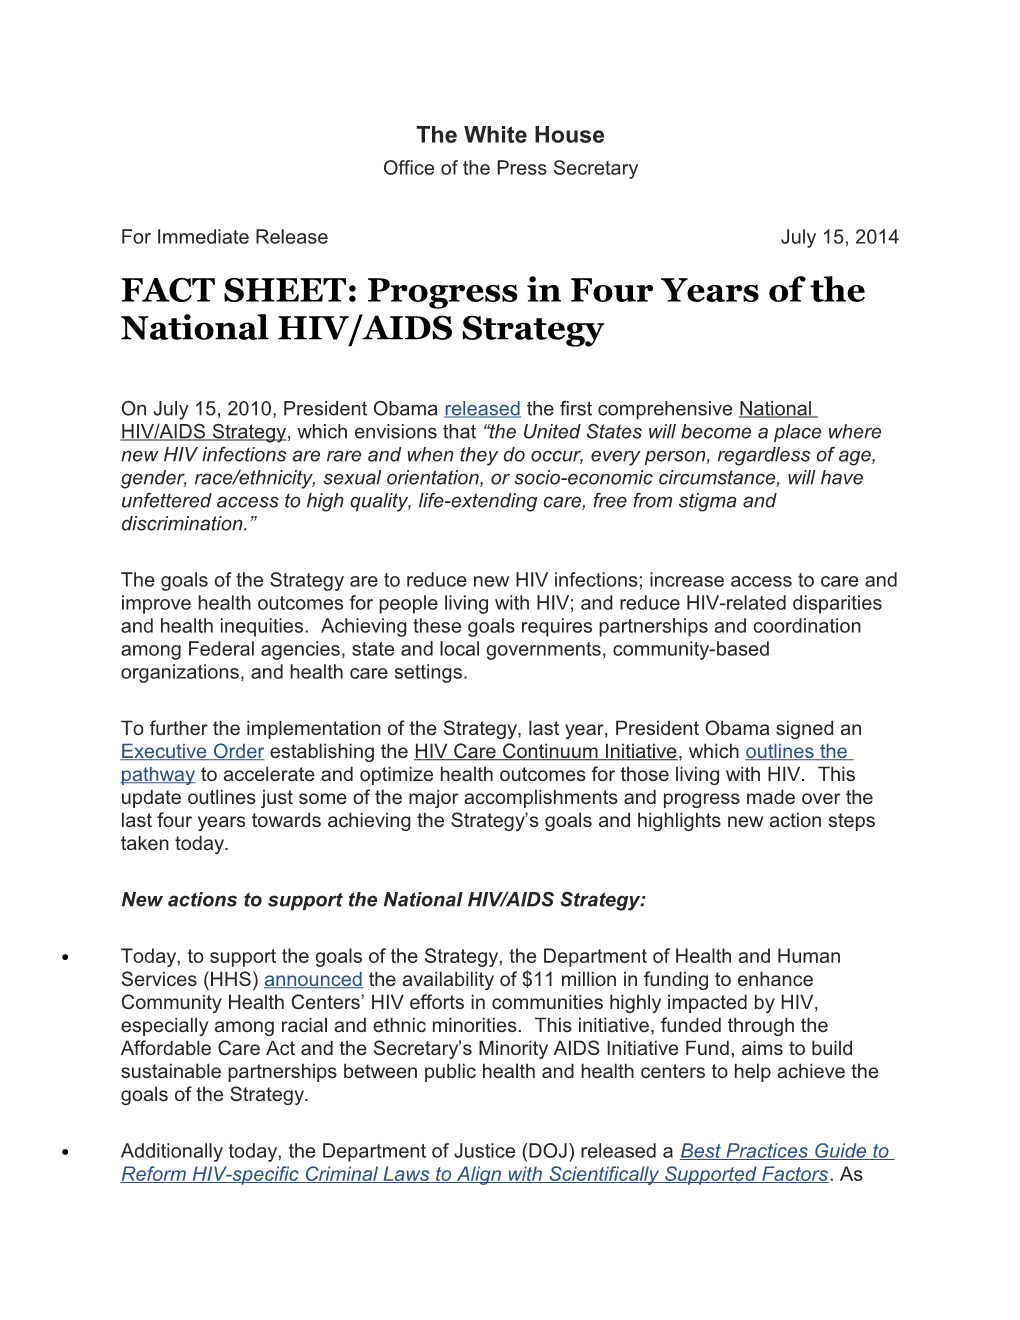 FACT SHEET: Progress in Four Years of the National HIV/AIDS Strategy